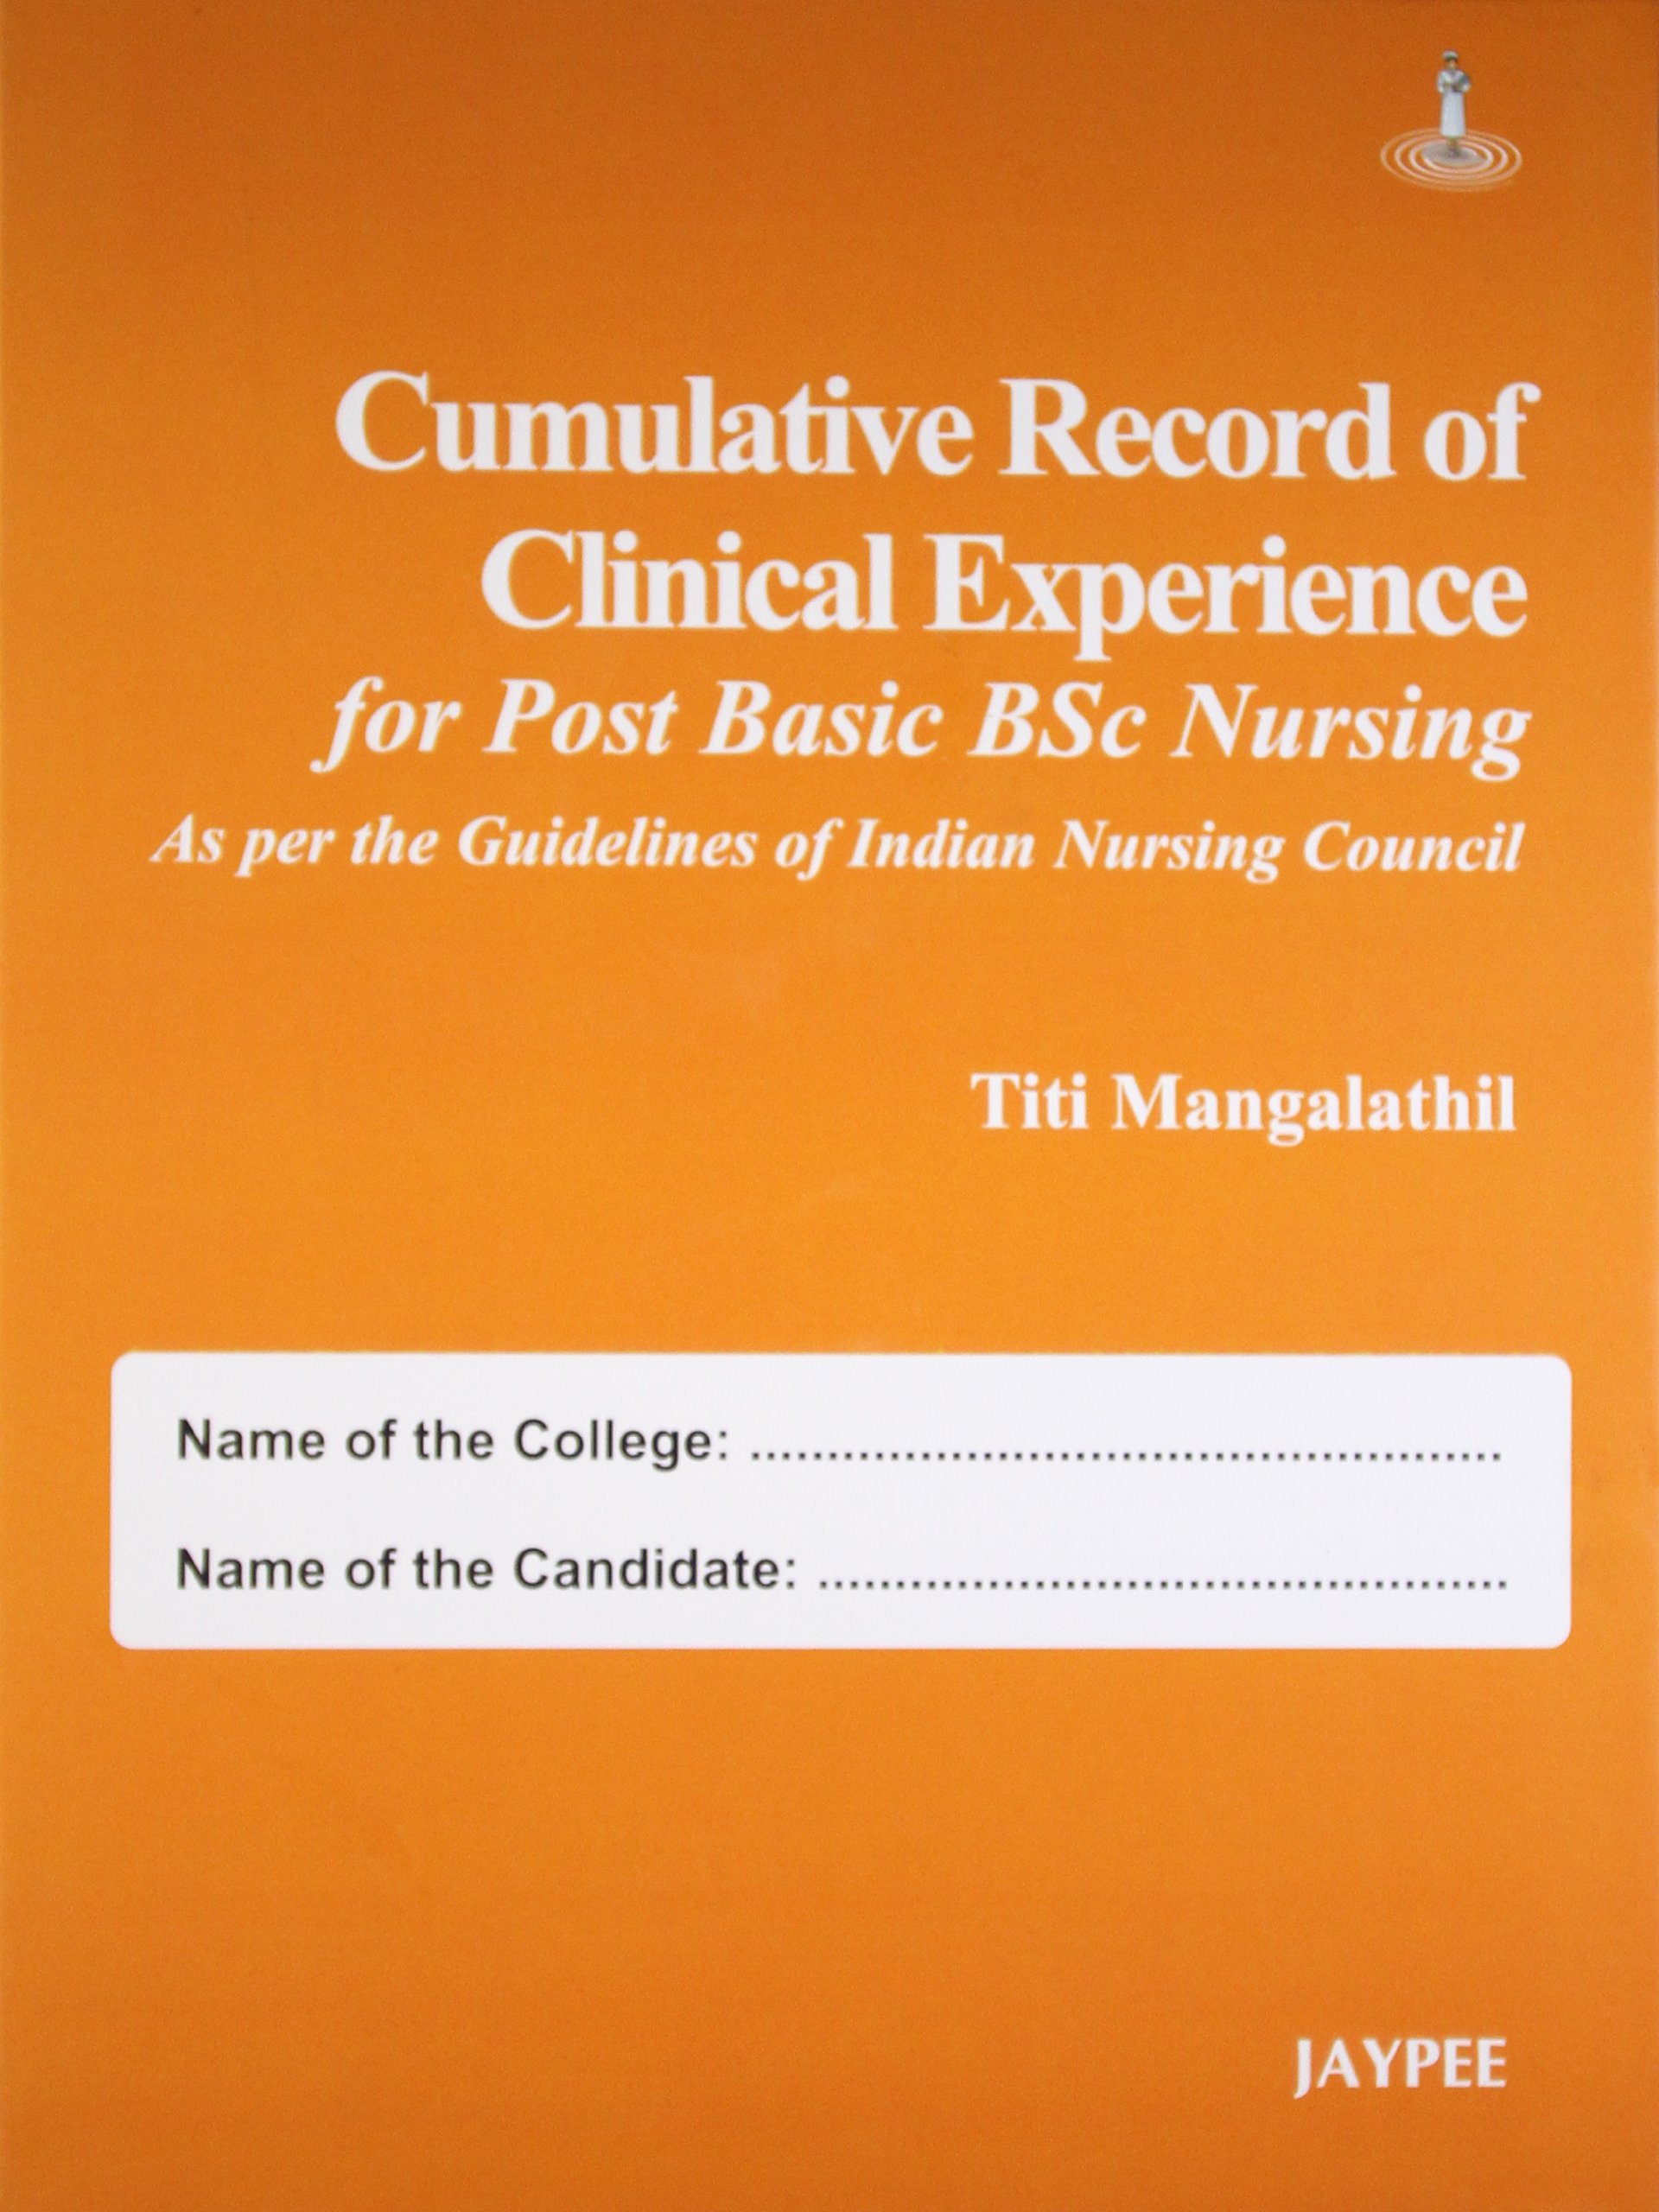 Cumulative Record Of Clinical Experience For Post Basic Bsc Nursing (As Per The Guid.Of Ind.Nur.Cou)